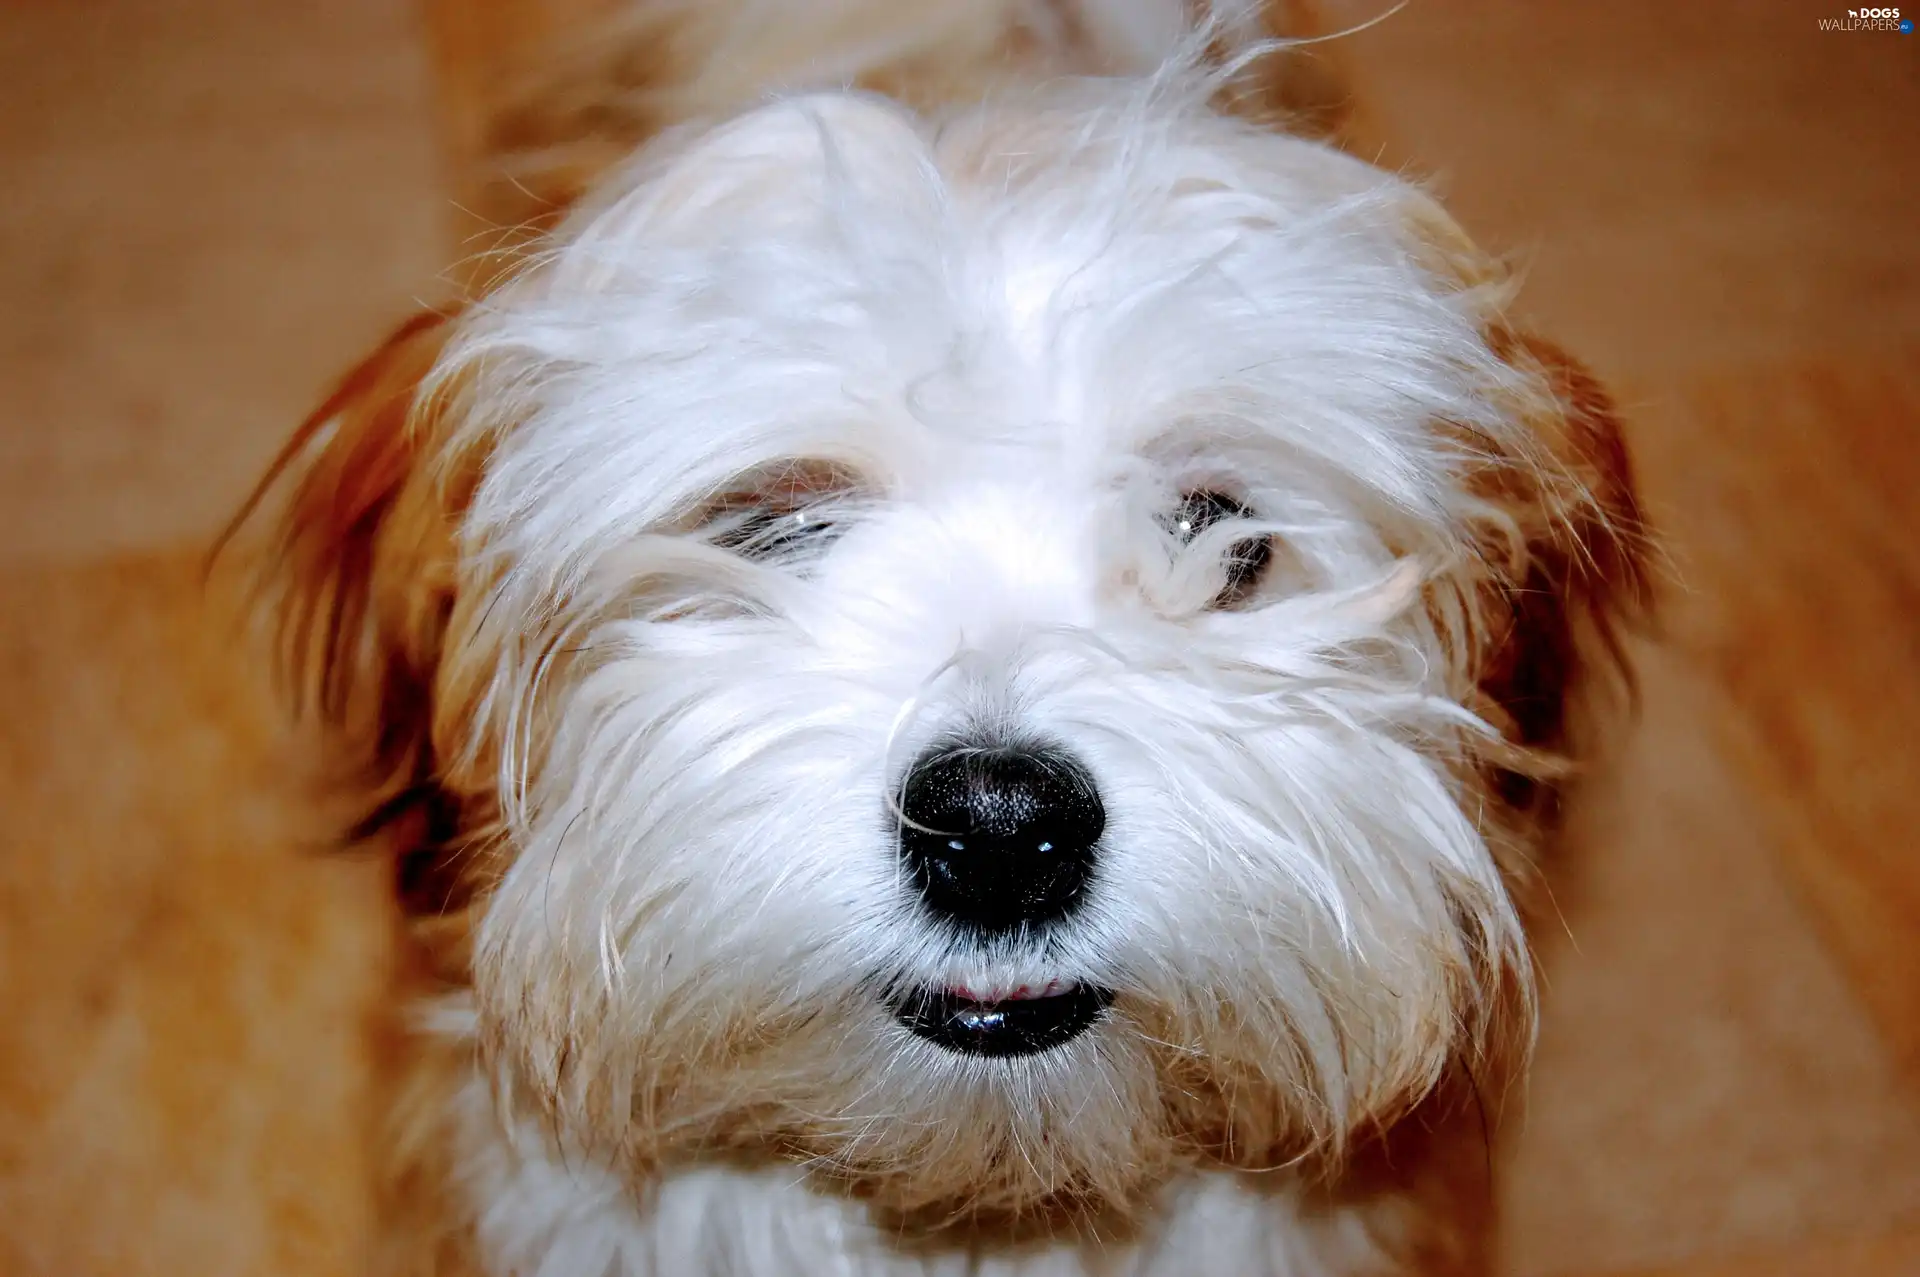 Havanese, mouth